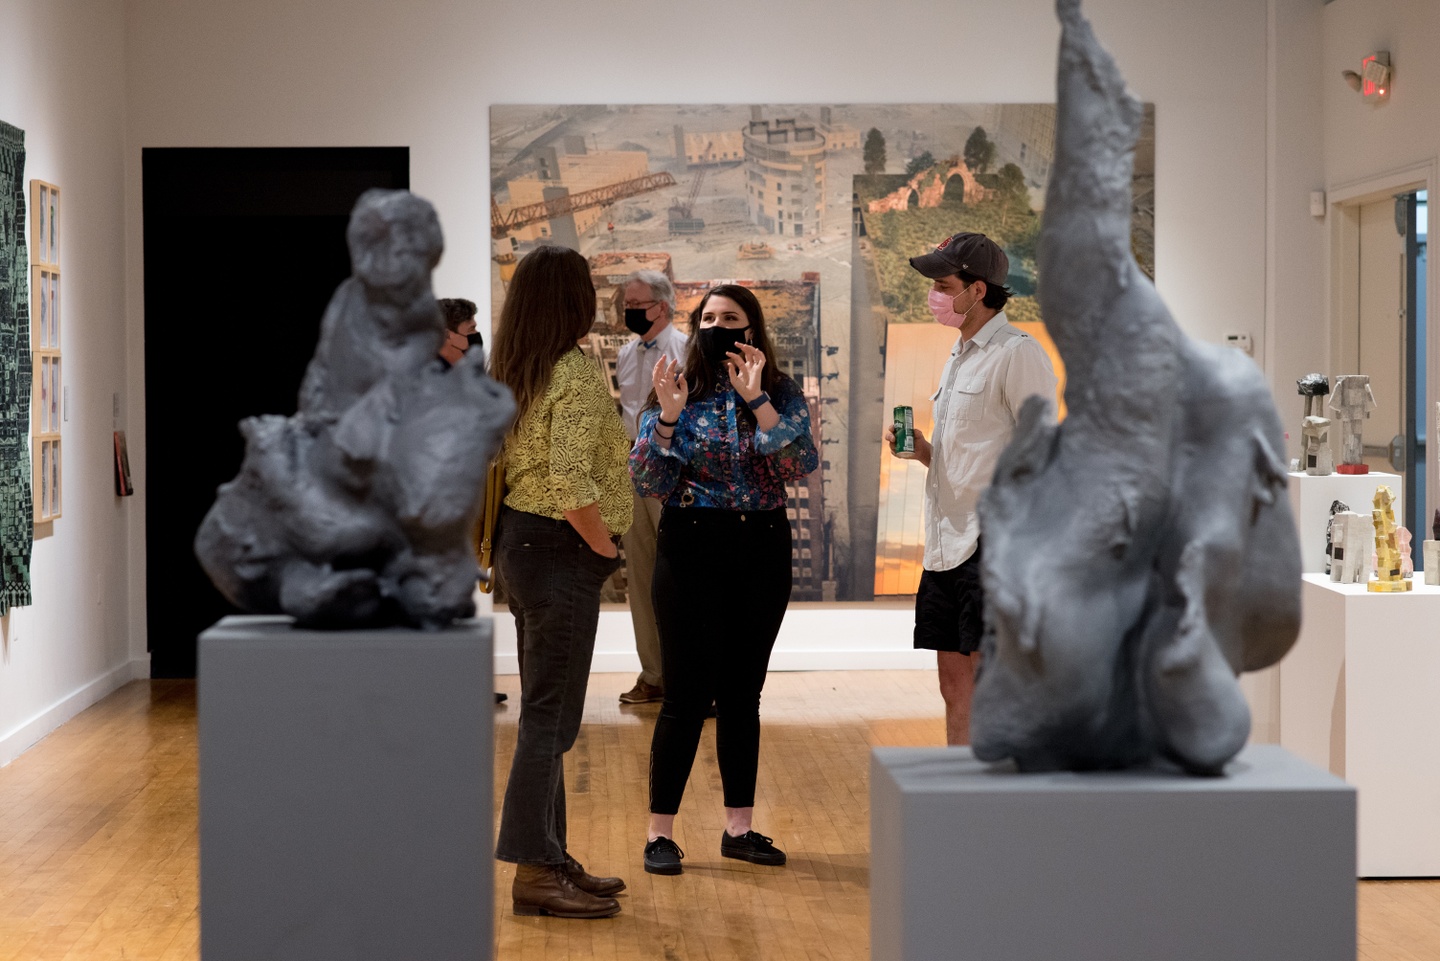 Two people speak in the gallery during the exhibition opening, with others viewing work; a pair of sculptures are in the foreground of the frame.